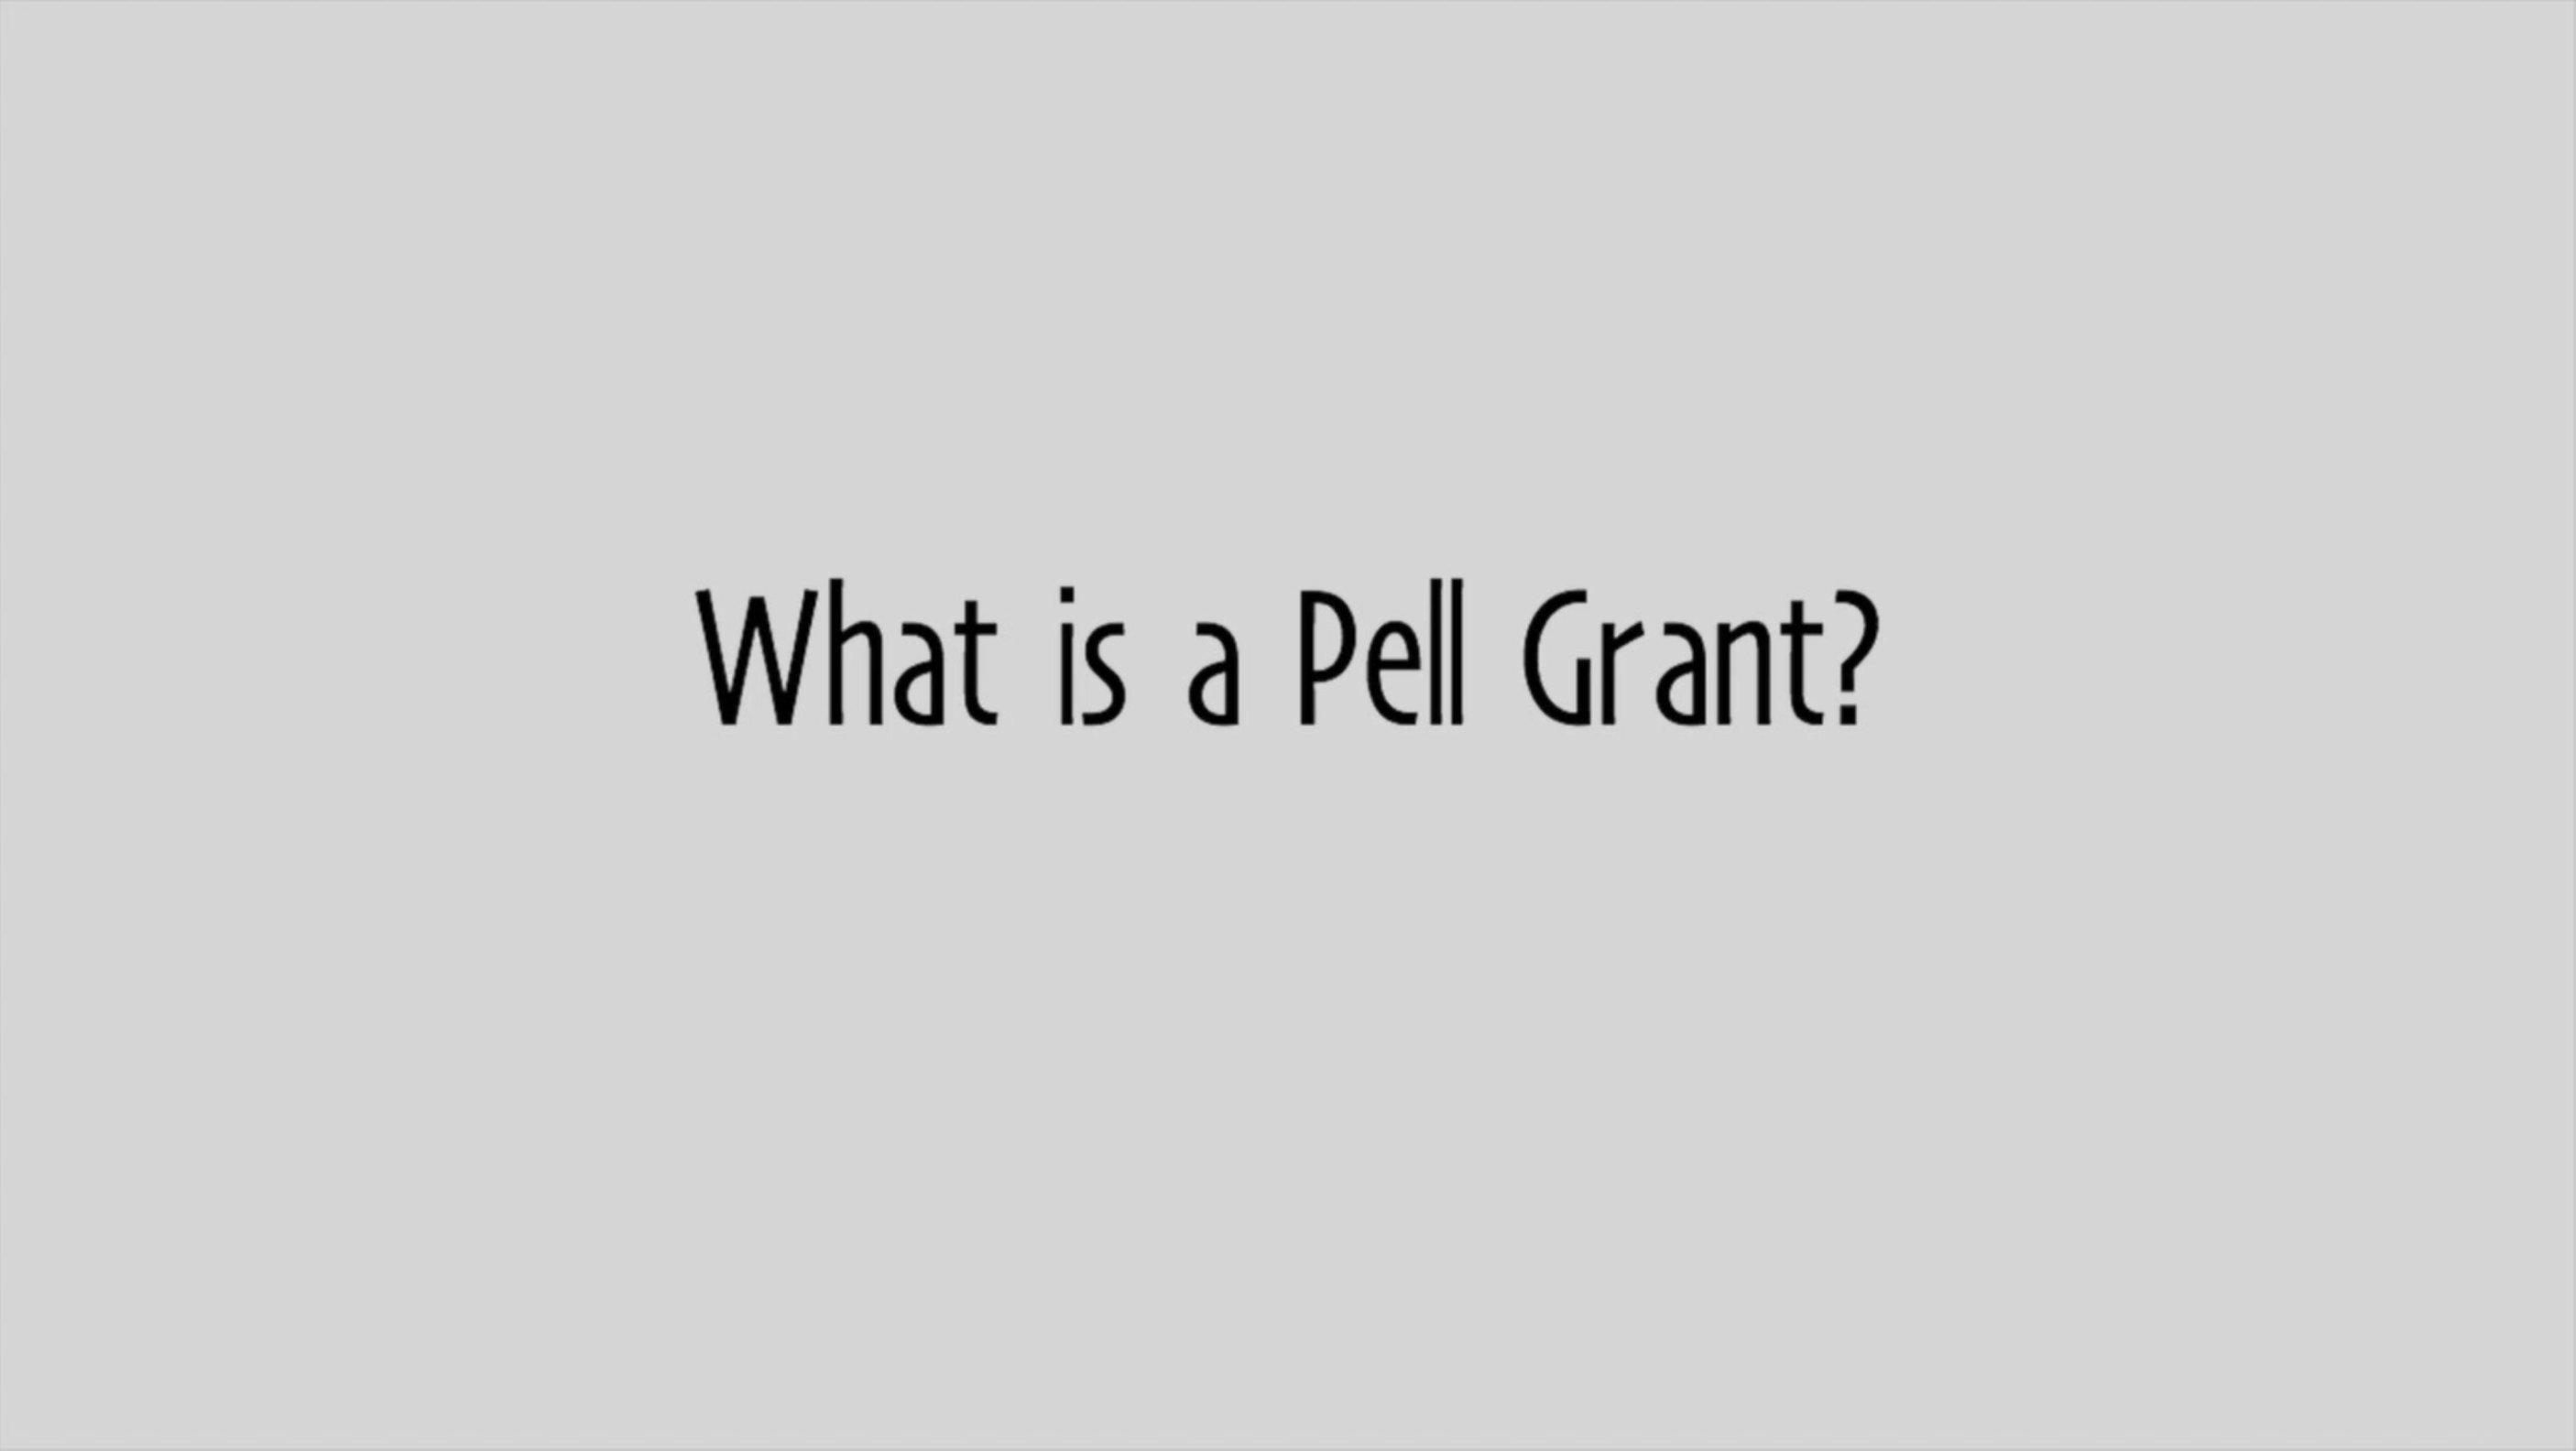 Play 'What is a Pell Grant?'